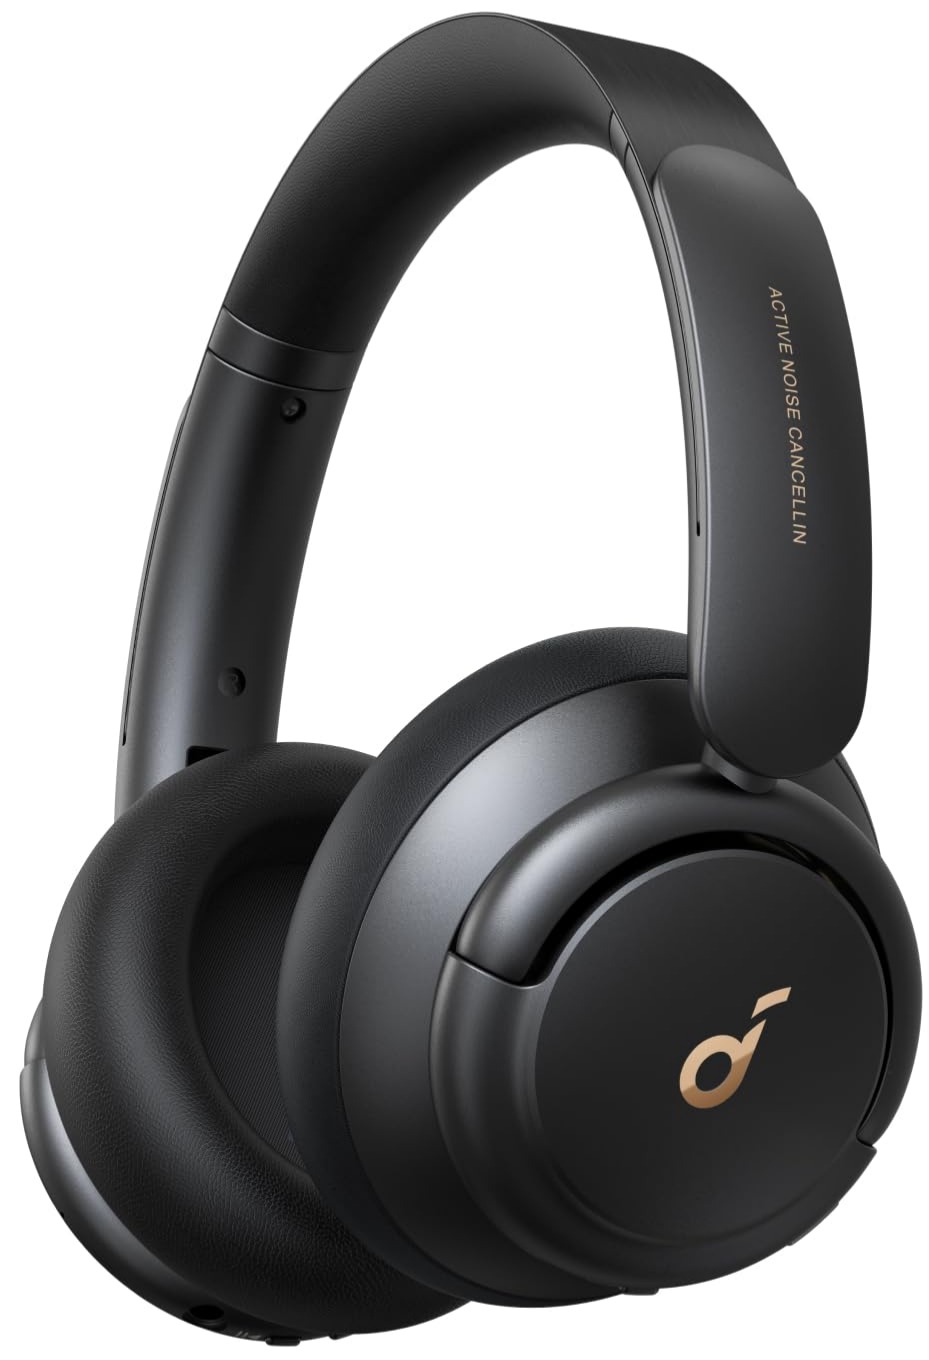 Soundcore by Anker Life Q30 Hybrid Active Noise Cancelling Headphones with Multiple Modes, Hi-Res Sound, Custom EQ via App, 40H Playtime, Comfortable Fit $55.99